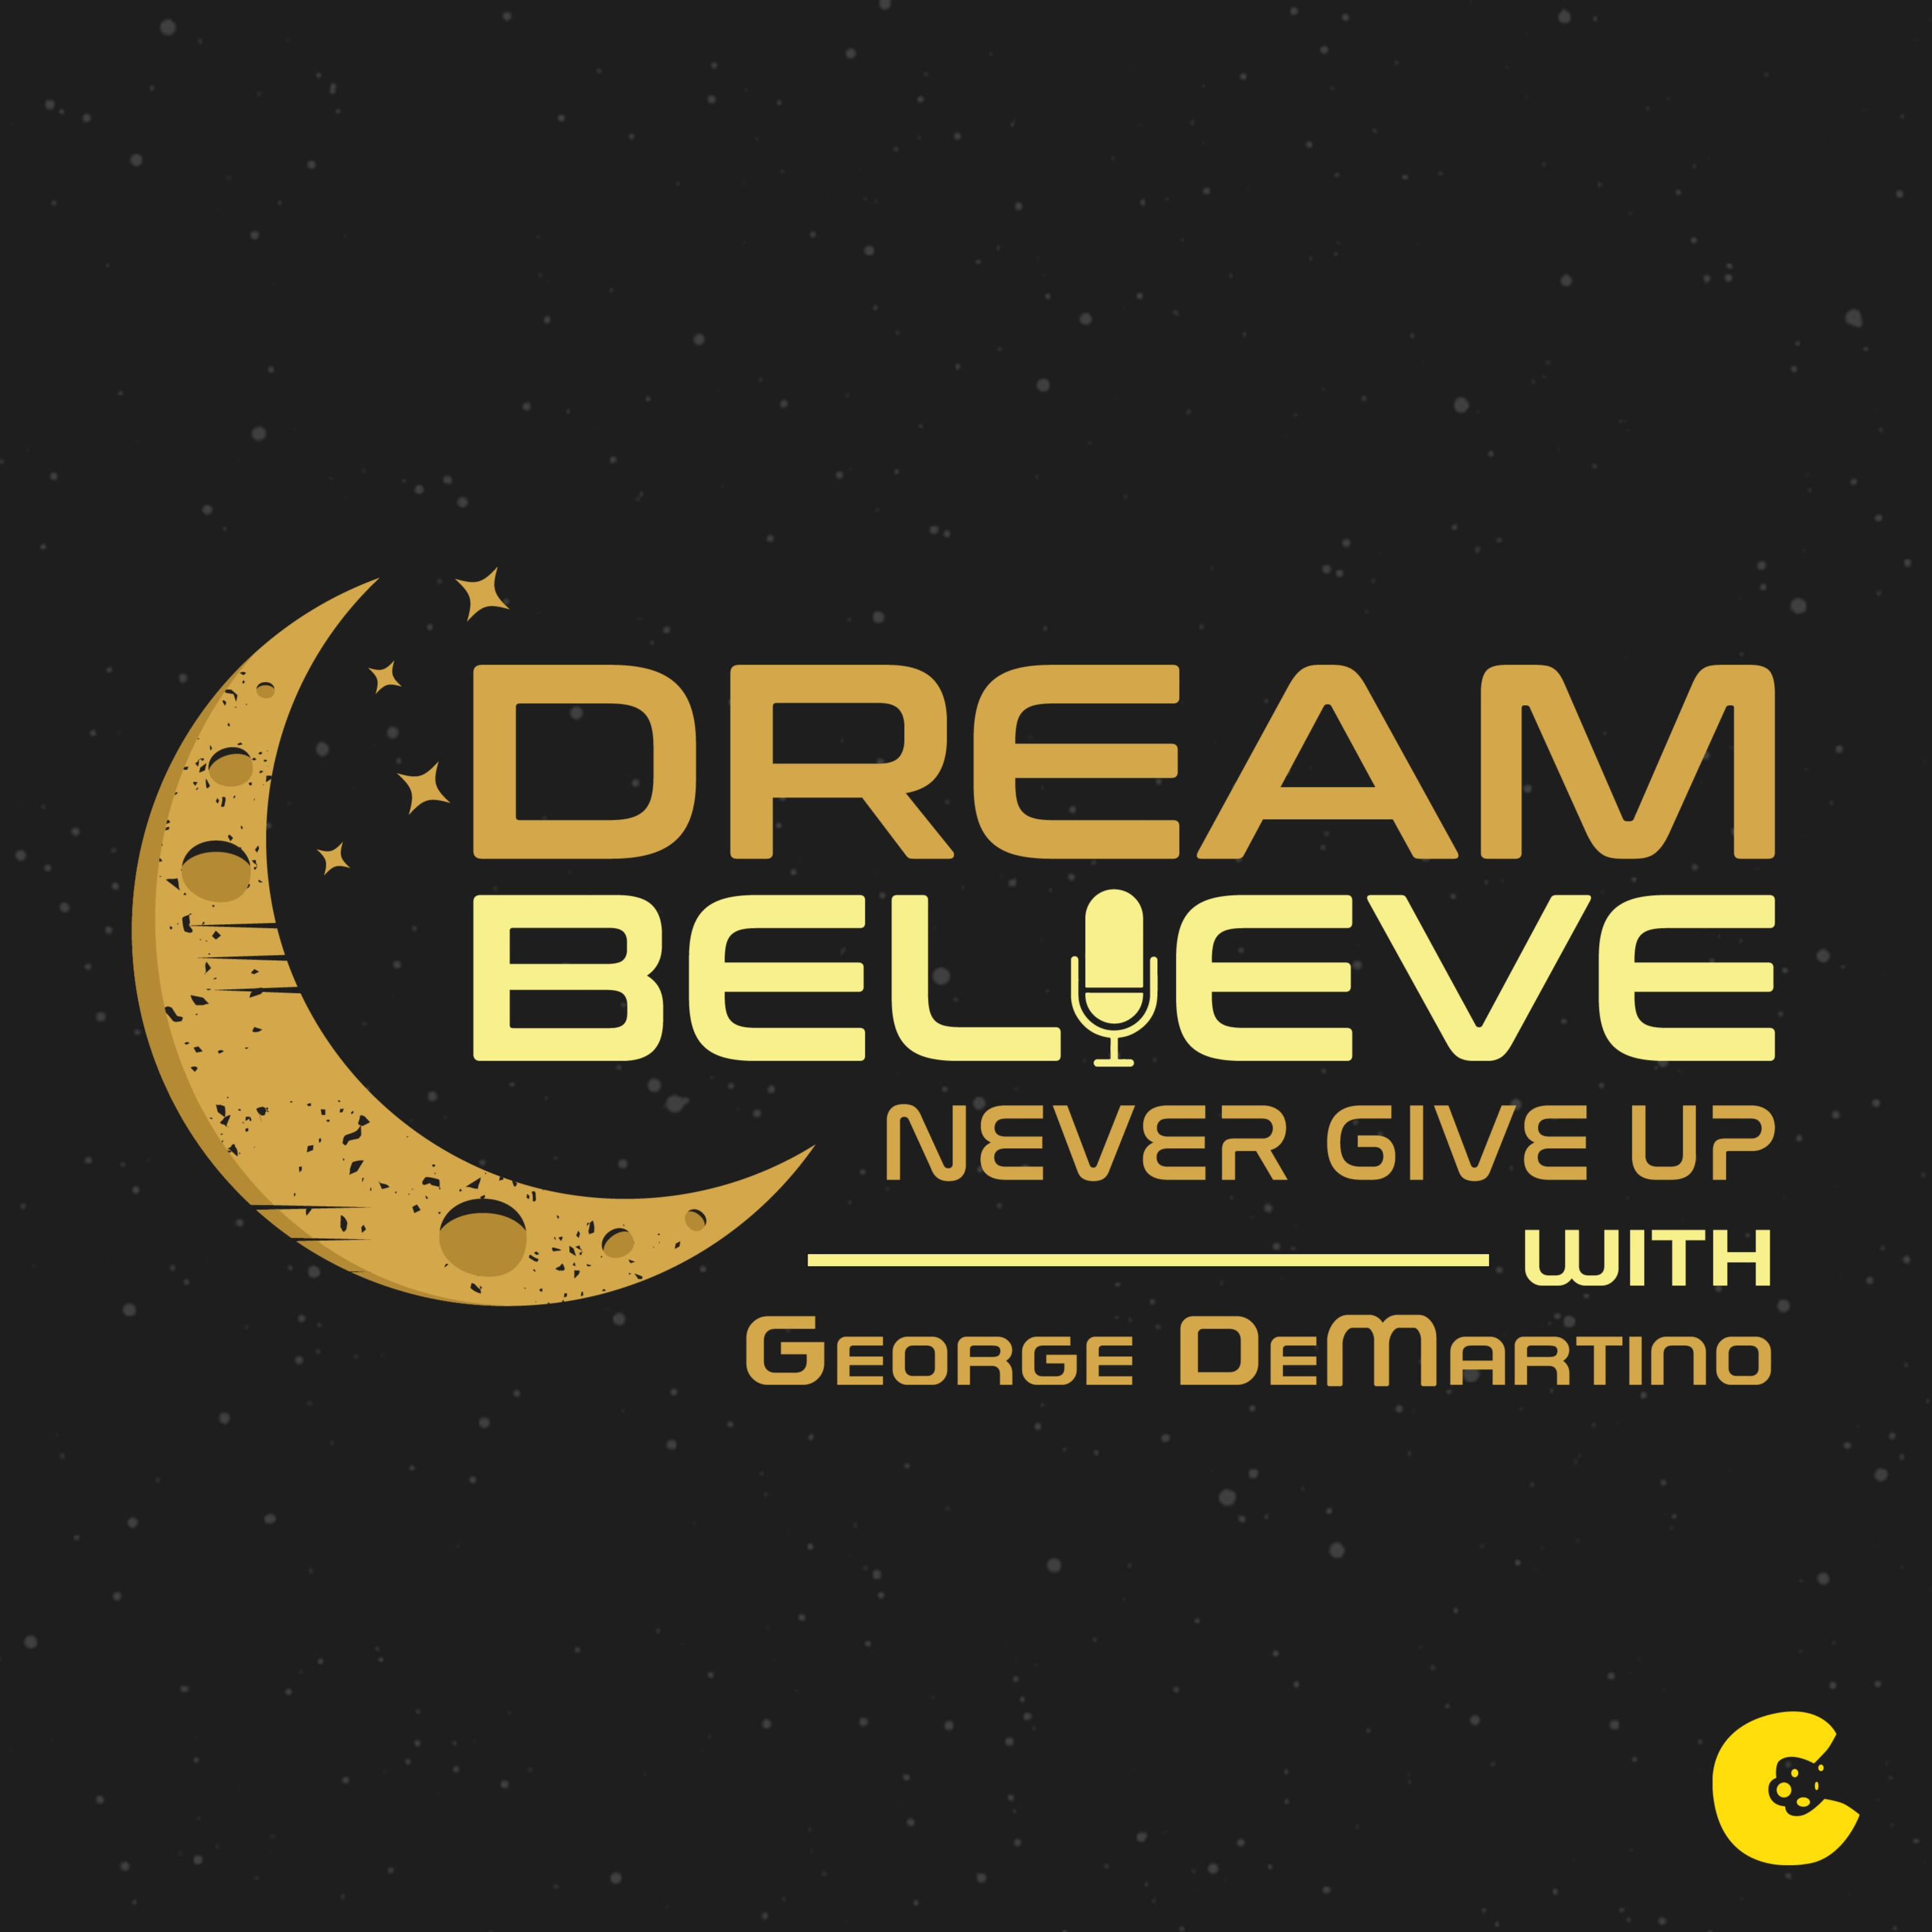 Dream Believe Never Give Up - Reviewed Image